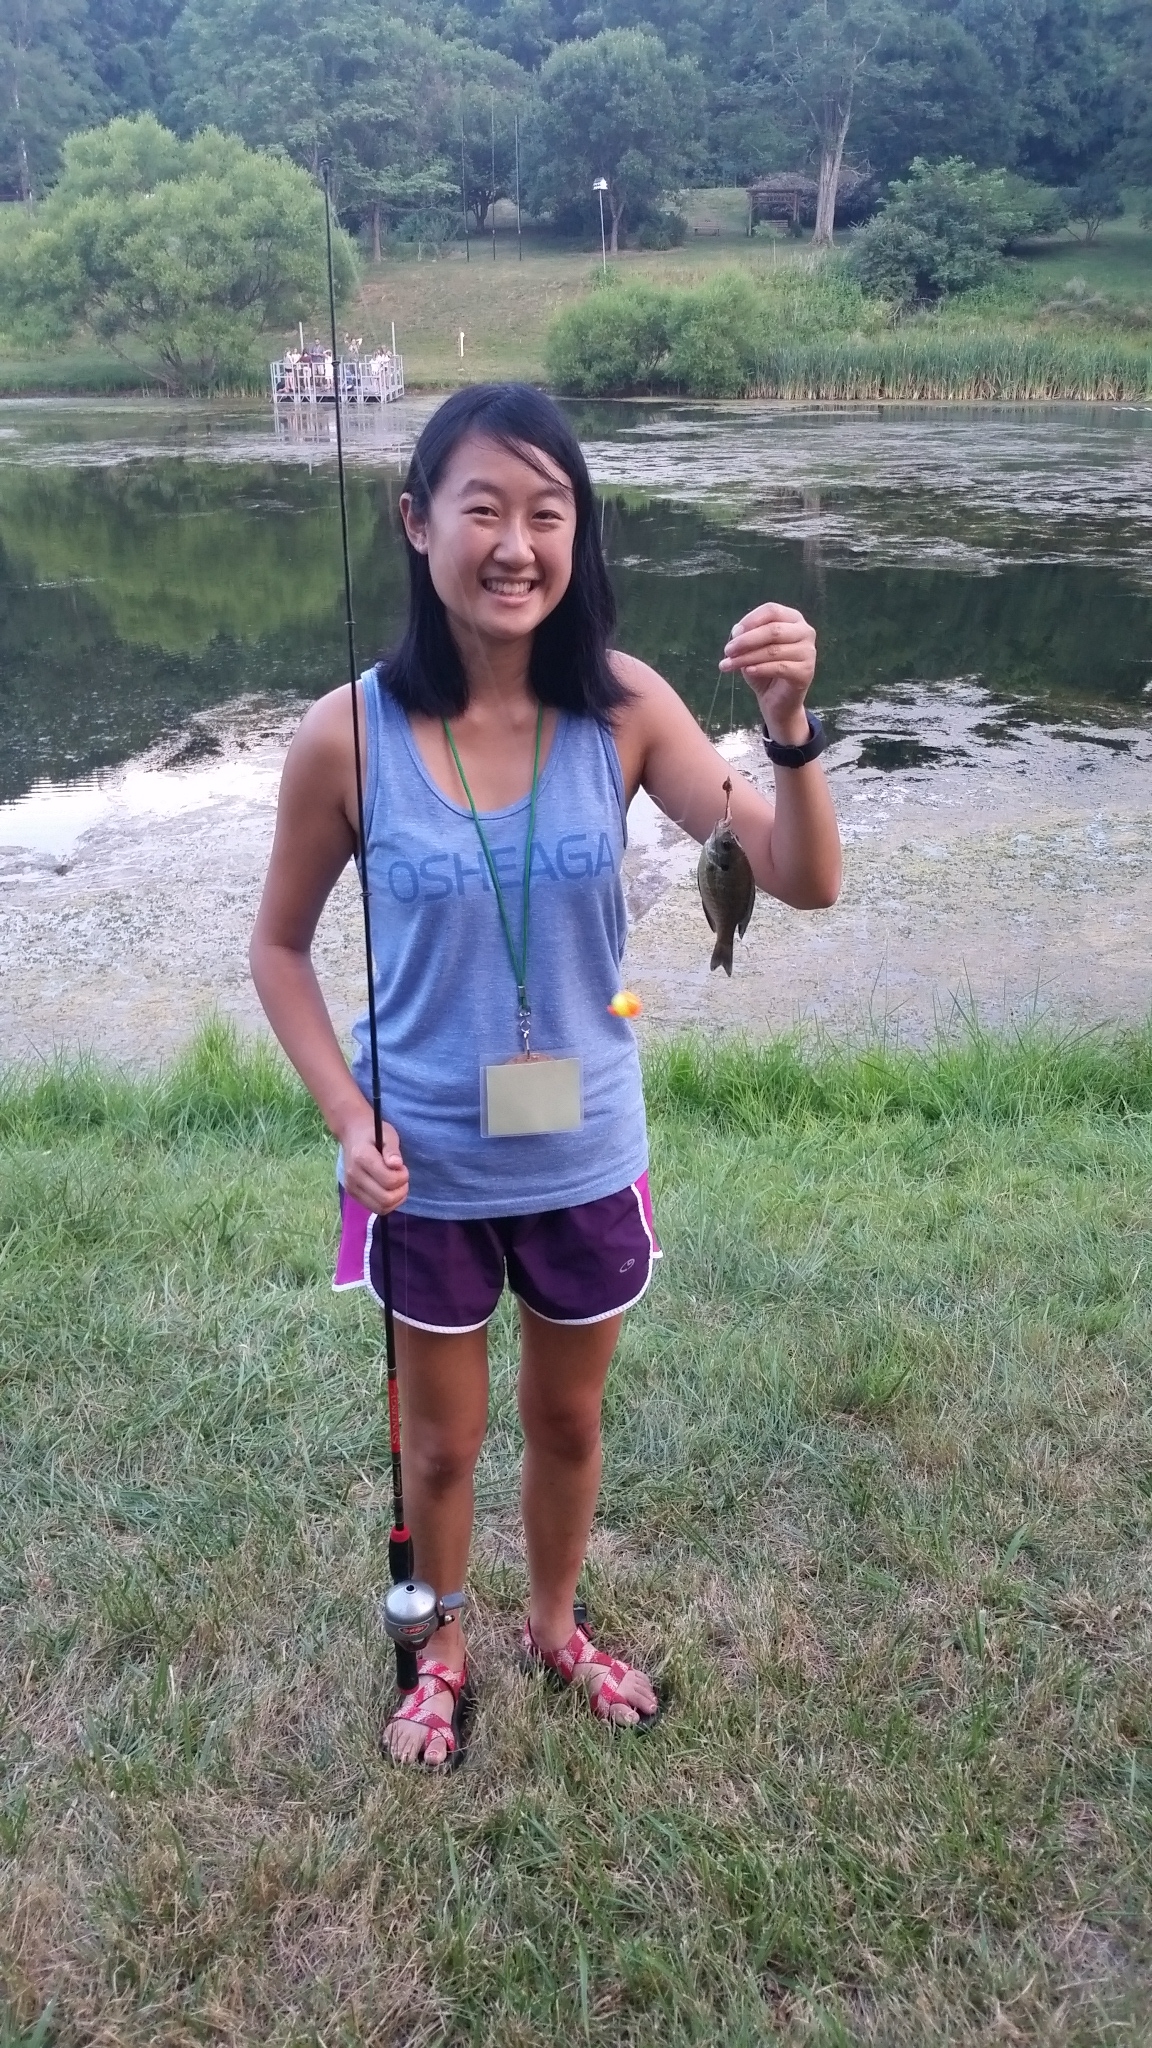 This photo shows a dark haired young woman holding a fishing pole in one hand and a fish on a line in the other. In the background is a pond. She is smiling. It appears to be summer.